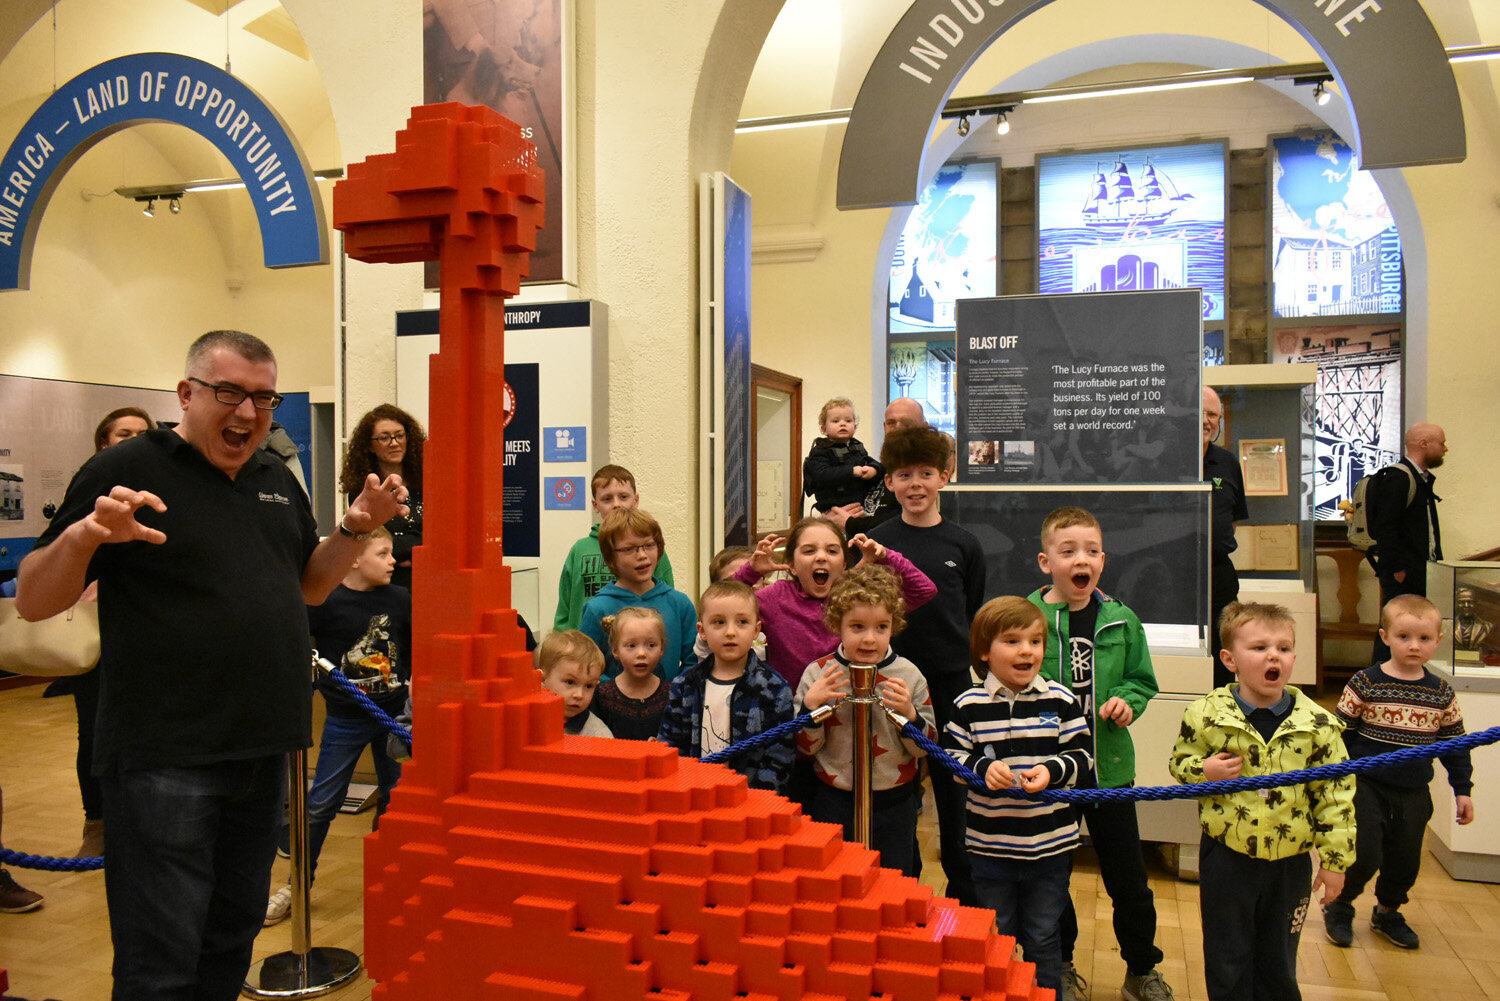  In February 2019, a LEGO dinosaur was built with help from our visitors here in Dunfermline. It was created out of 35,000 LEGO bricks! 